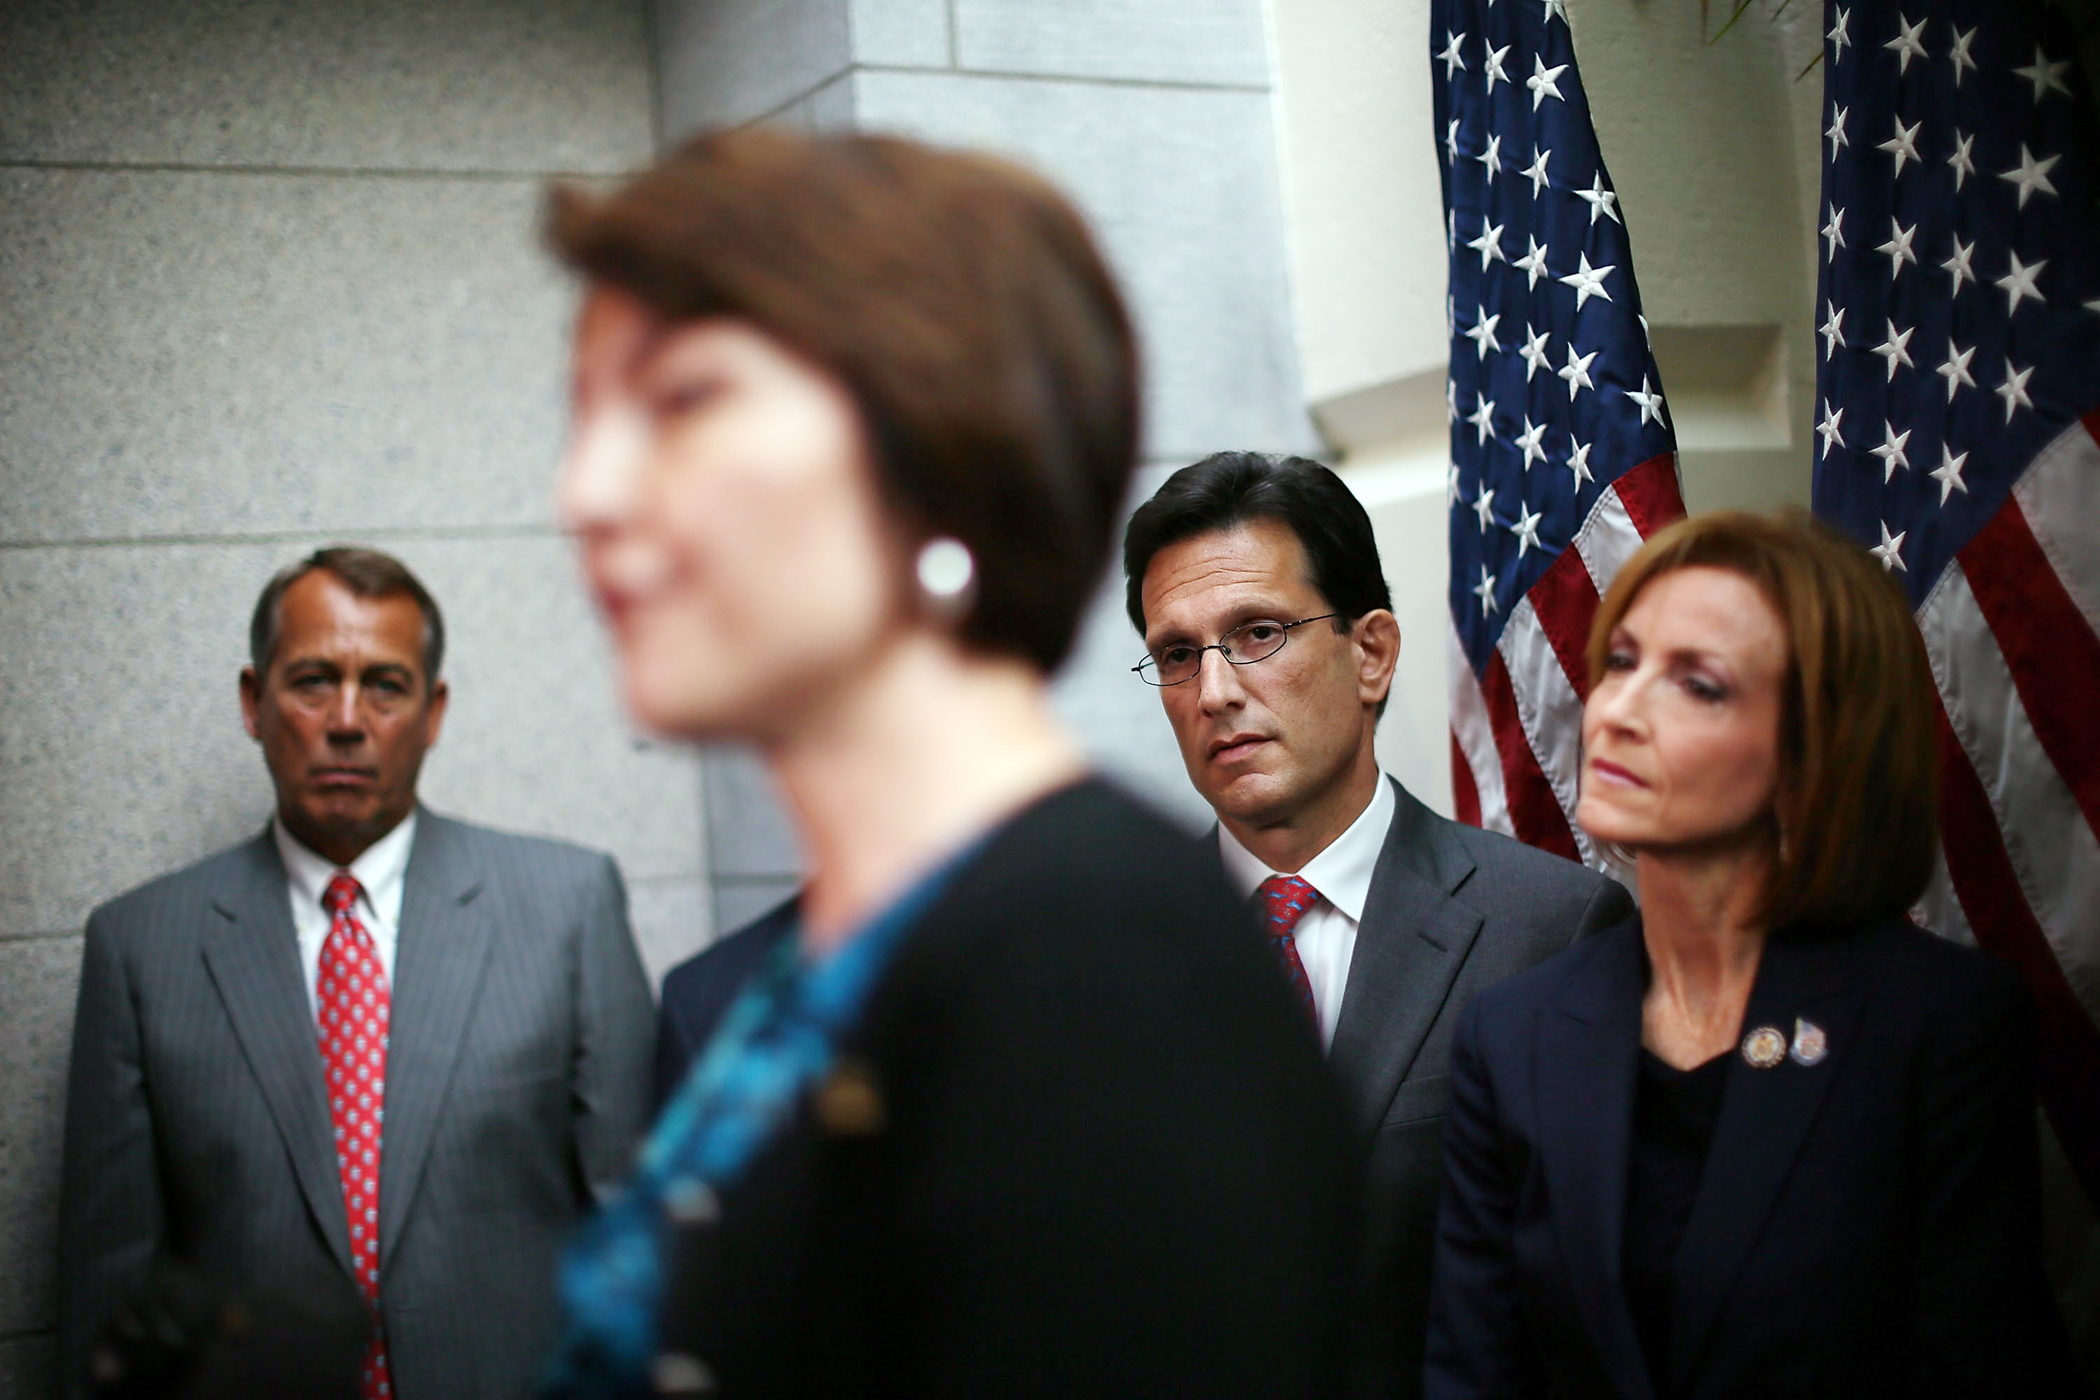 From left, Speaker of the House John Boehner, House Republican Conference vice chair Cathy McMorris Rodgers, House majority leader Eric Cantor and Representative Nan Hayworth attend a news conference on Capitol Hill on July 10, 2012 (Alex Wong / Getty Images)